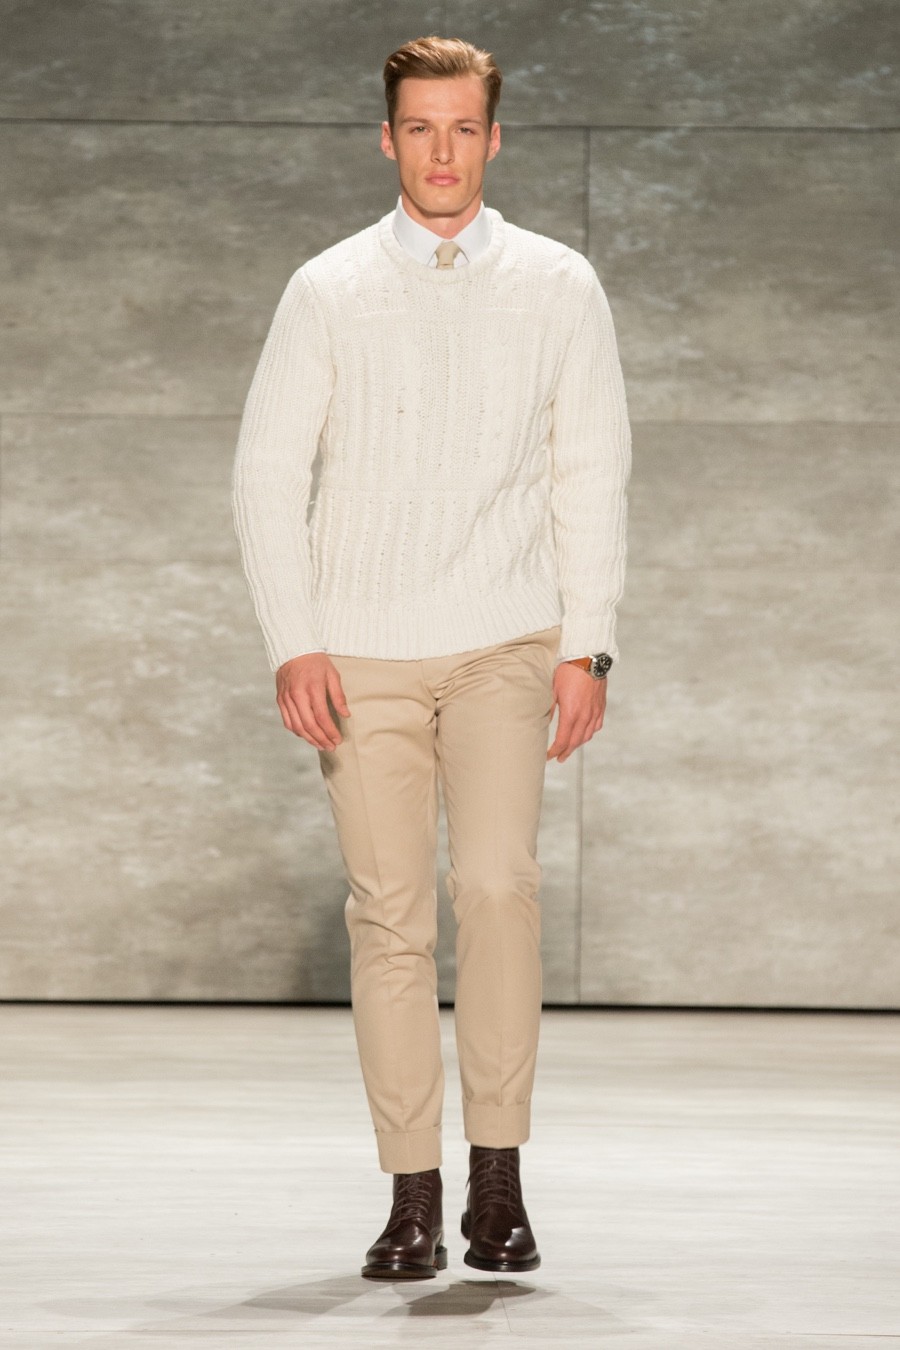 Todd Snyder Fall Winter 2015 Menswear Collection 012